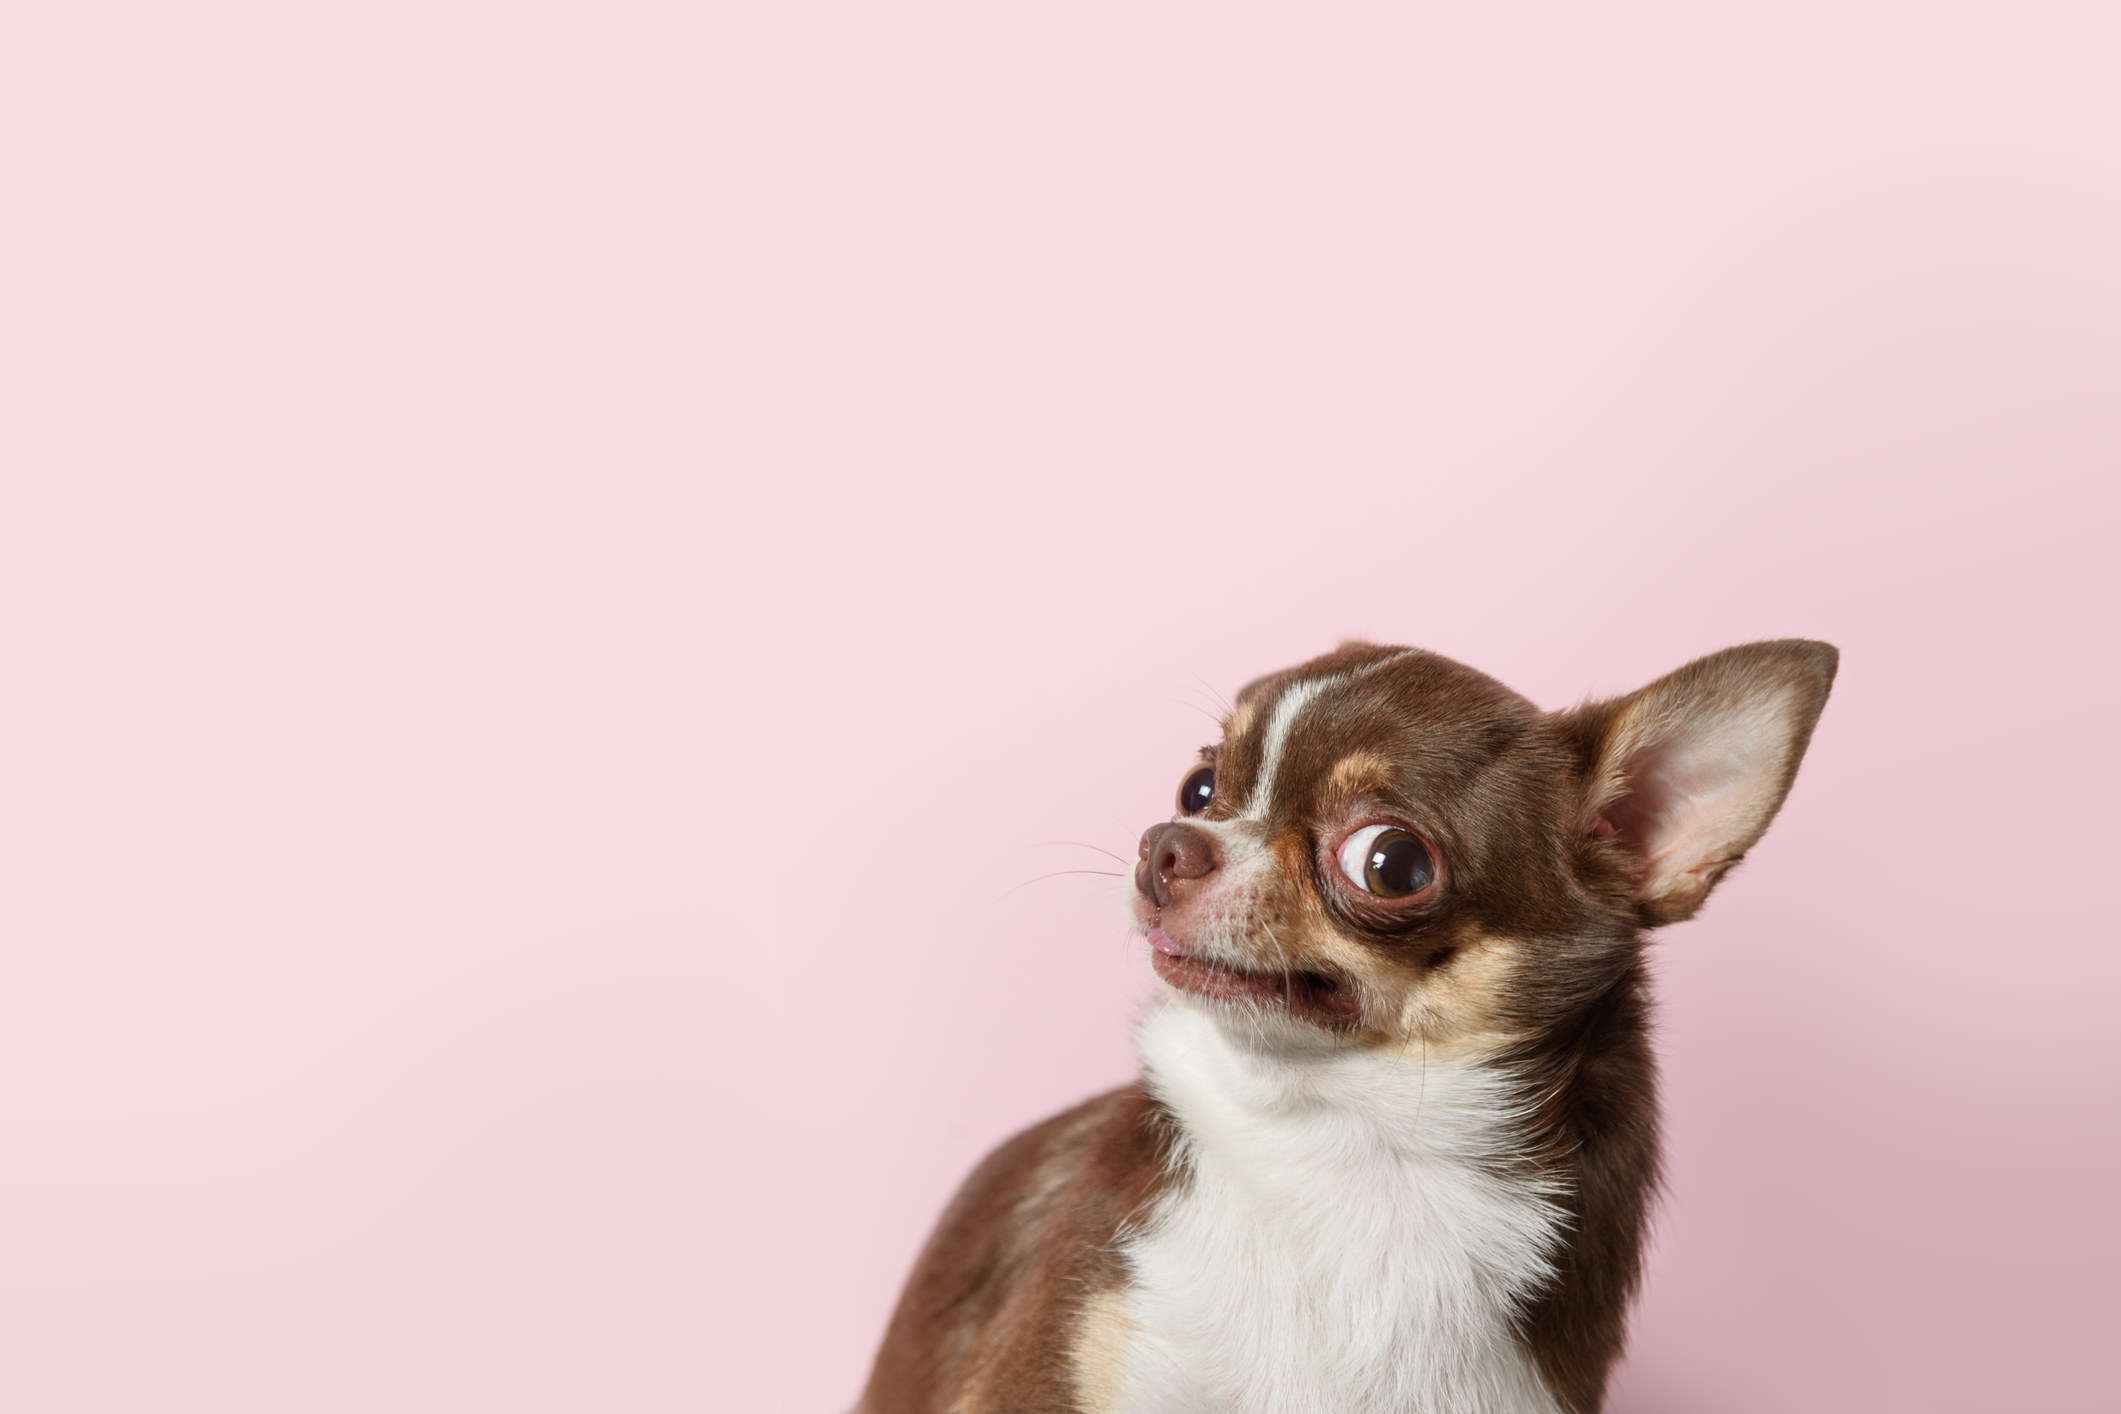 Cute brown mexican chihuahua dog isolated on light pink background. Outraged, unhappy dog looks